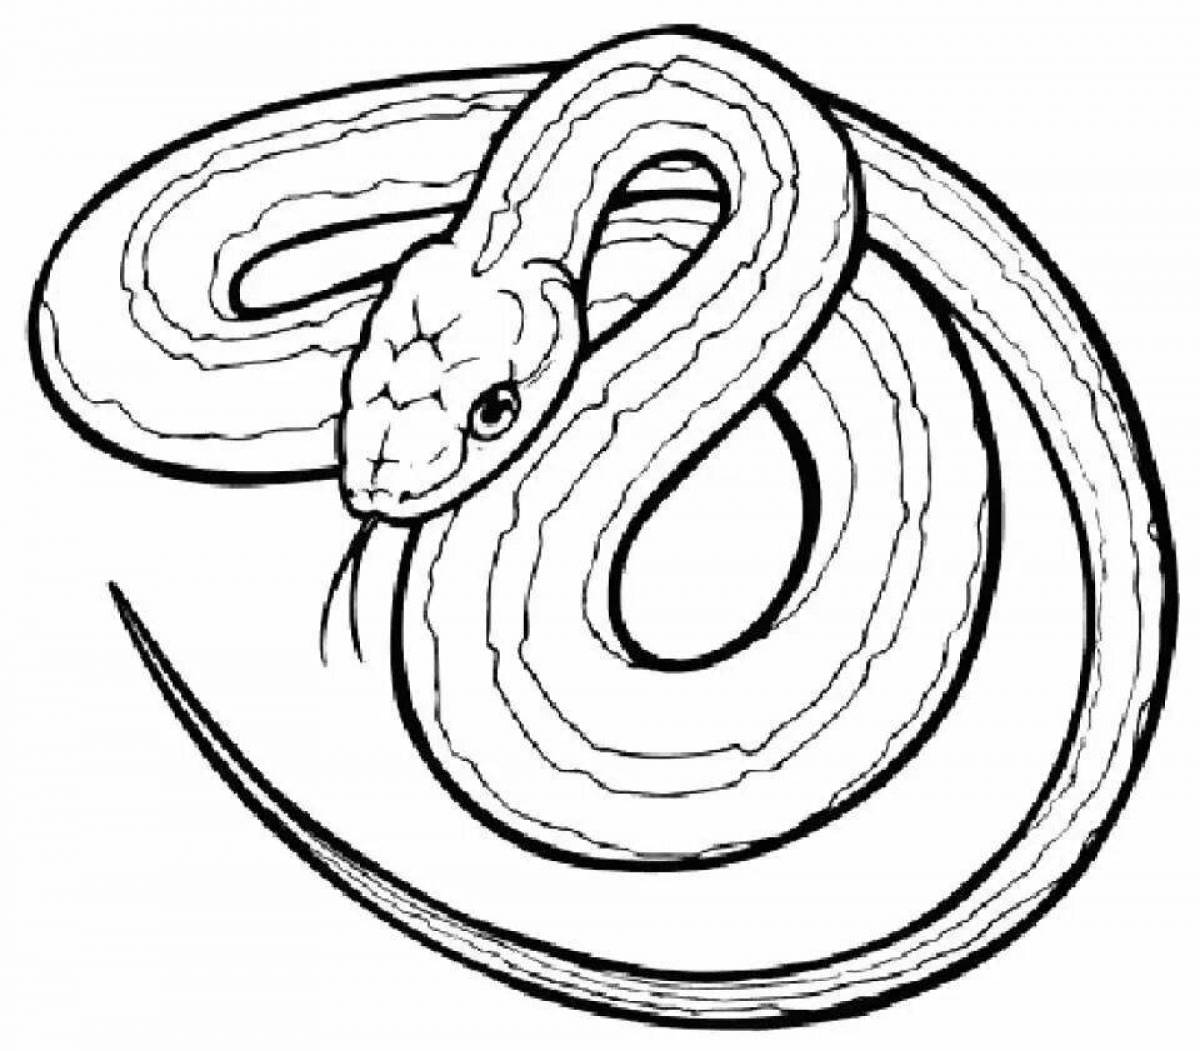 Coloring page gorgeous snake